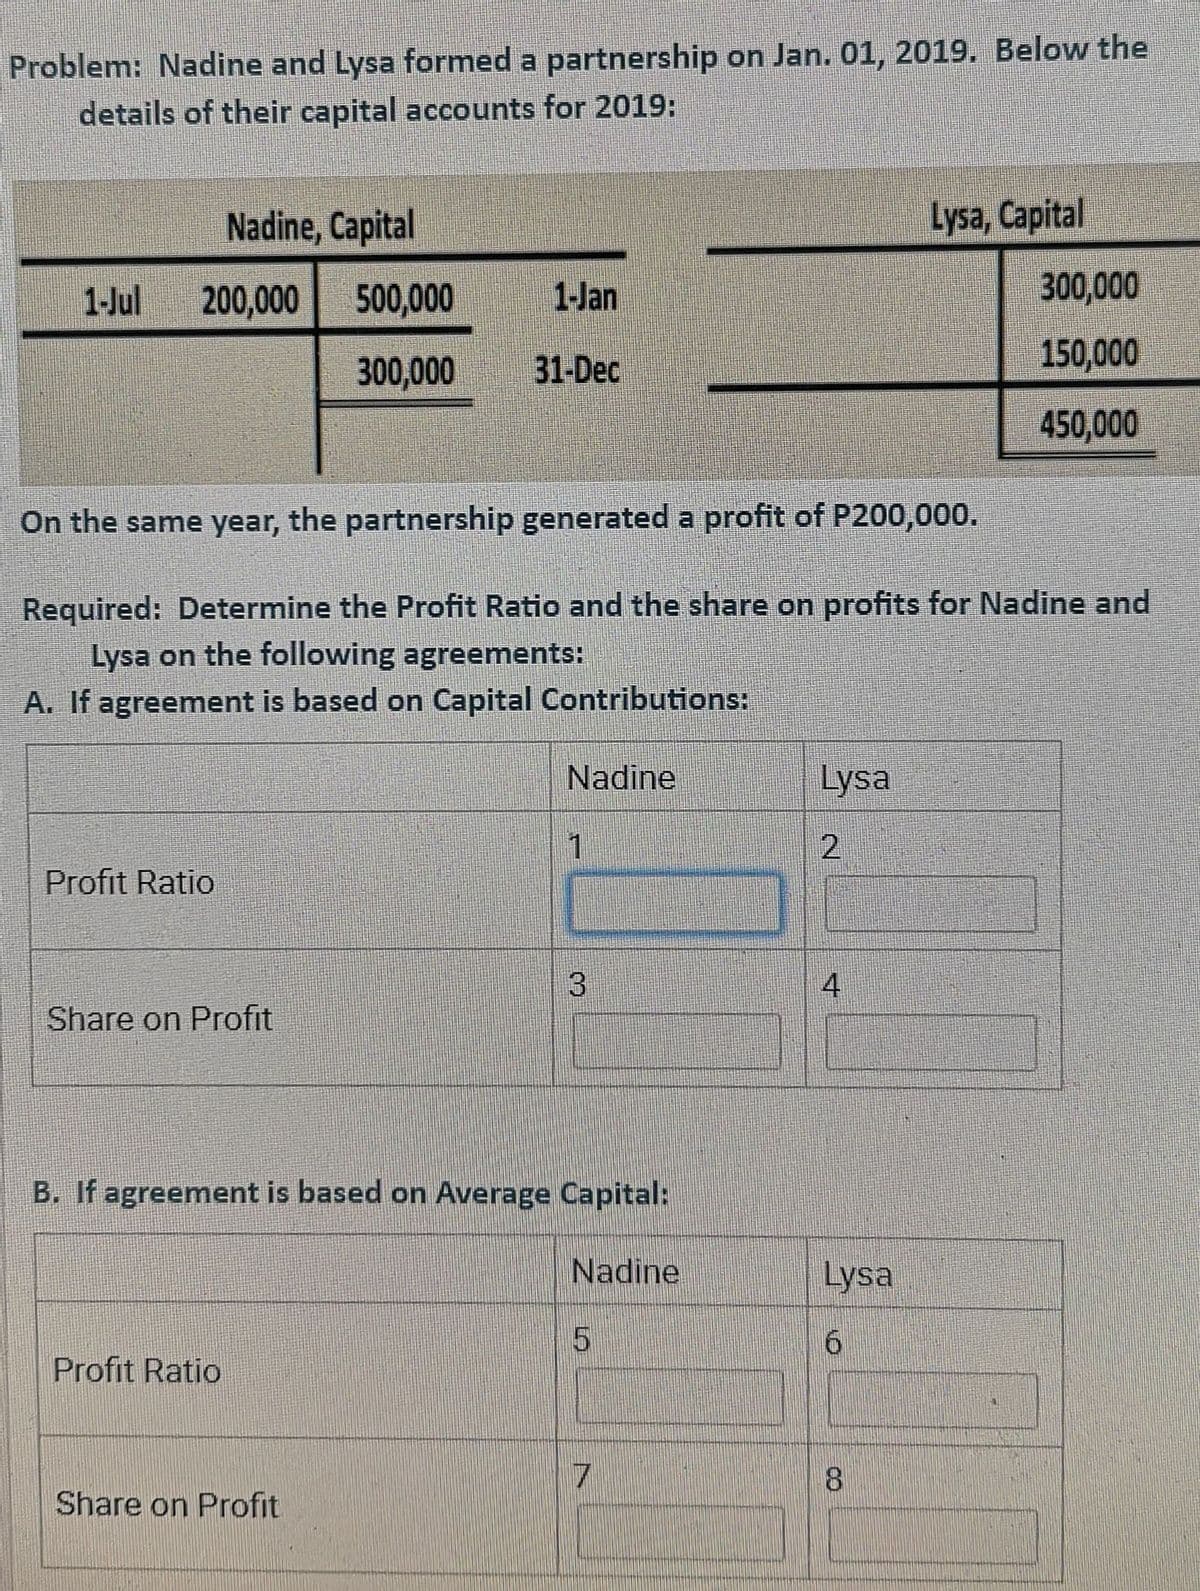 Problem: Nadine and Lysa formed a partnership on Jan. 01, 2019. Below the
details of their capital accounts for 2019:
Nadine, Capital
Lysa, Capital
1-Jul
200,000
500,000
1-Jan
300,000
300,000
31-Dec
150,000
450,000
On the same year, the partnership generated a profit of P200,000.
Required: Determine the Profit Ratio and the share on profits for Nadine and
Lysa on the following agreements:
A. If agreement is based on Capital Contributions:
Nadine
Lysa
1
Profit Ratio
4
Share on Profit
B. If agreement is based on Average Capital:
Nadine
Lysa
5
Profit Ratio
Share on Profit
2.
CO
3.
